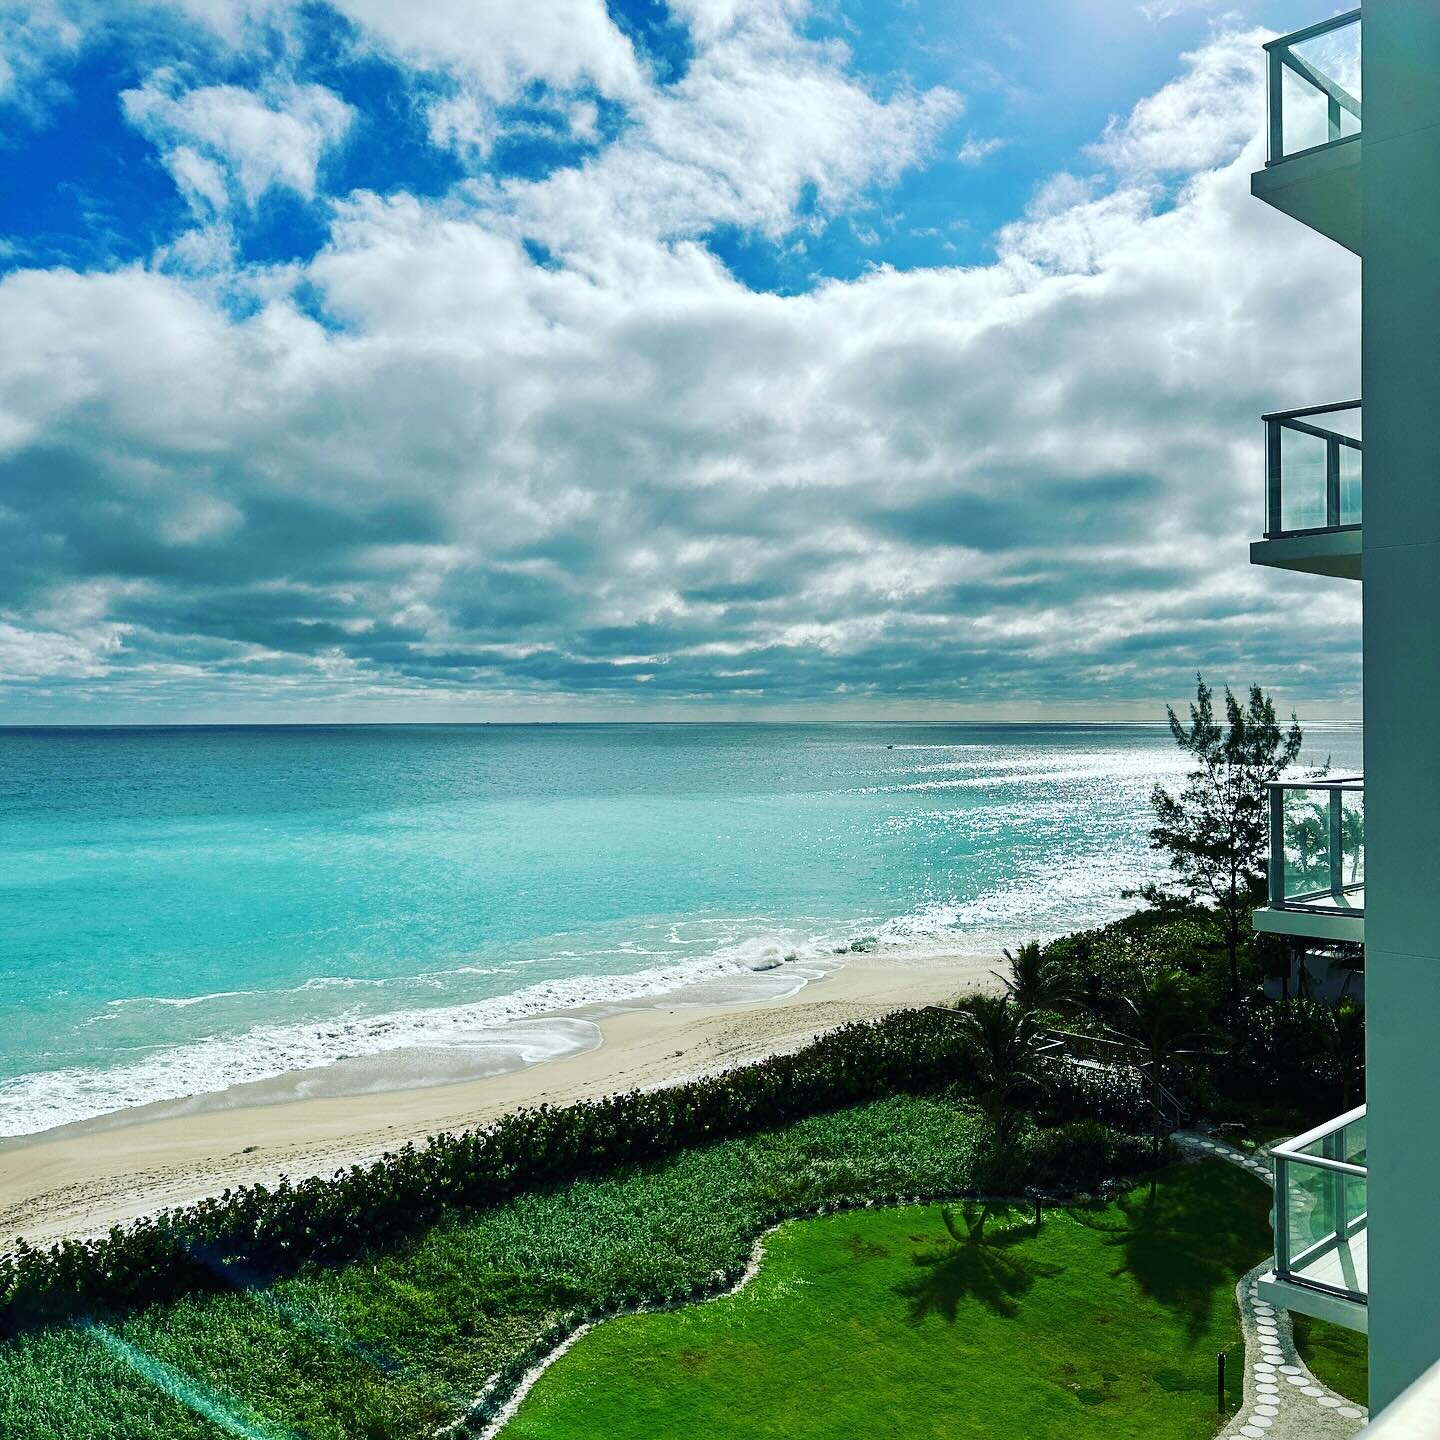 I guess if you have to go to work after a long holiday weekend, it might as well be with this view! Never gets old. #singerisland #thedesignerlife #ilovemyjob #southflorida #interiordesign